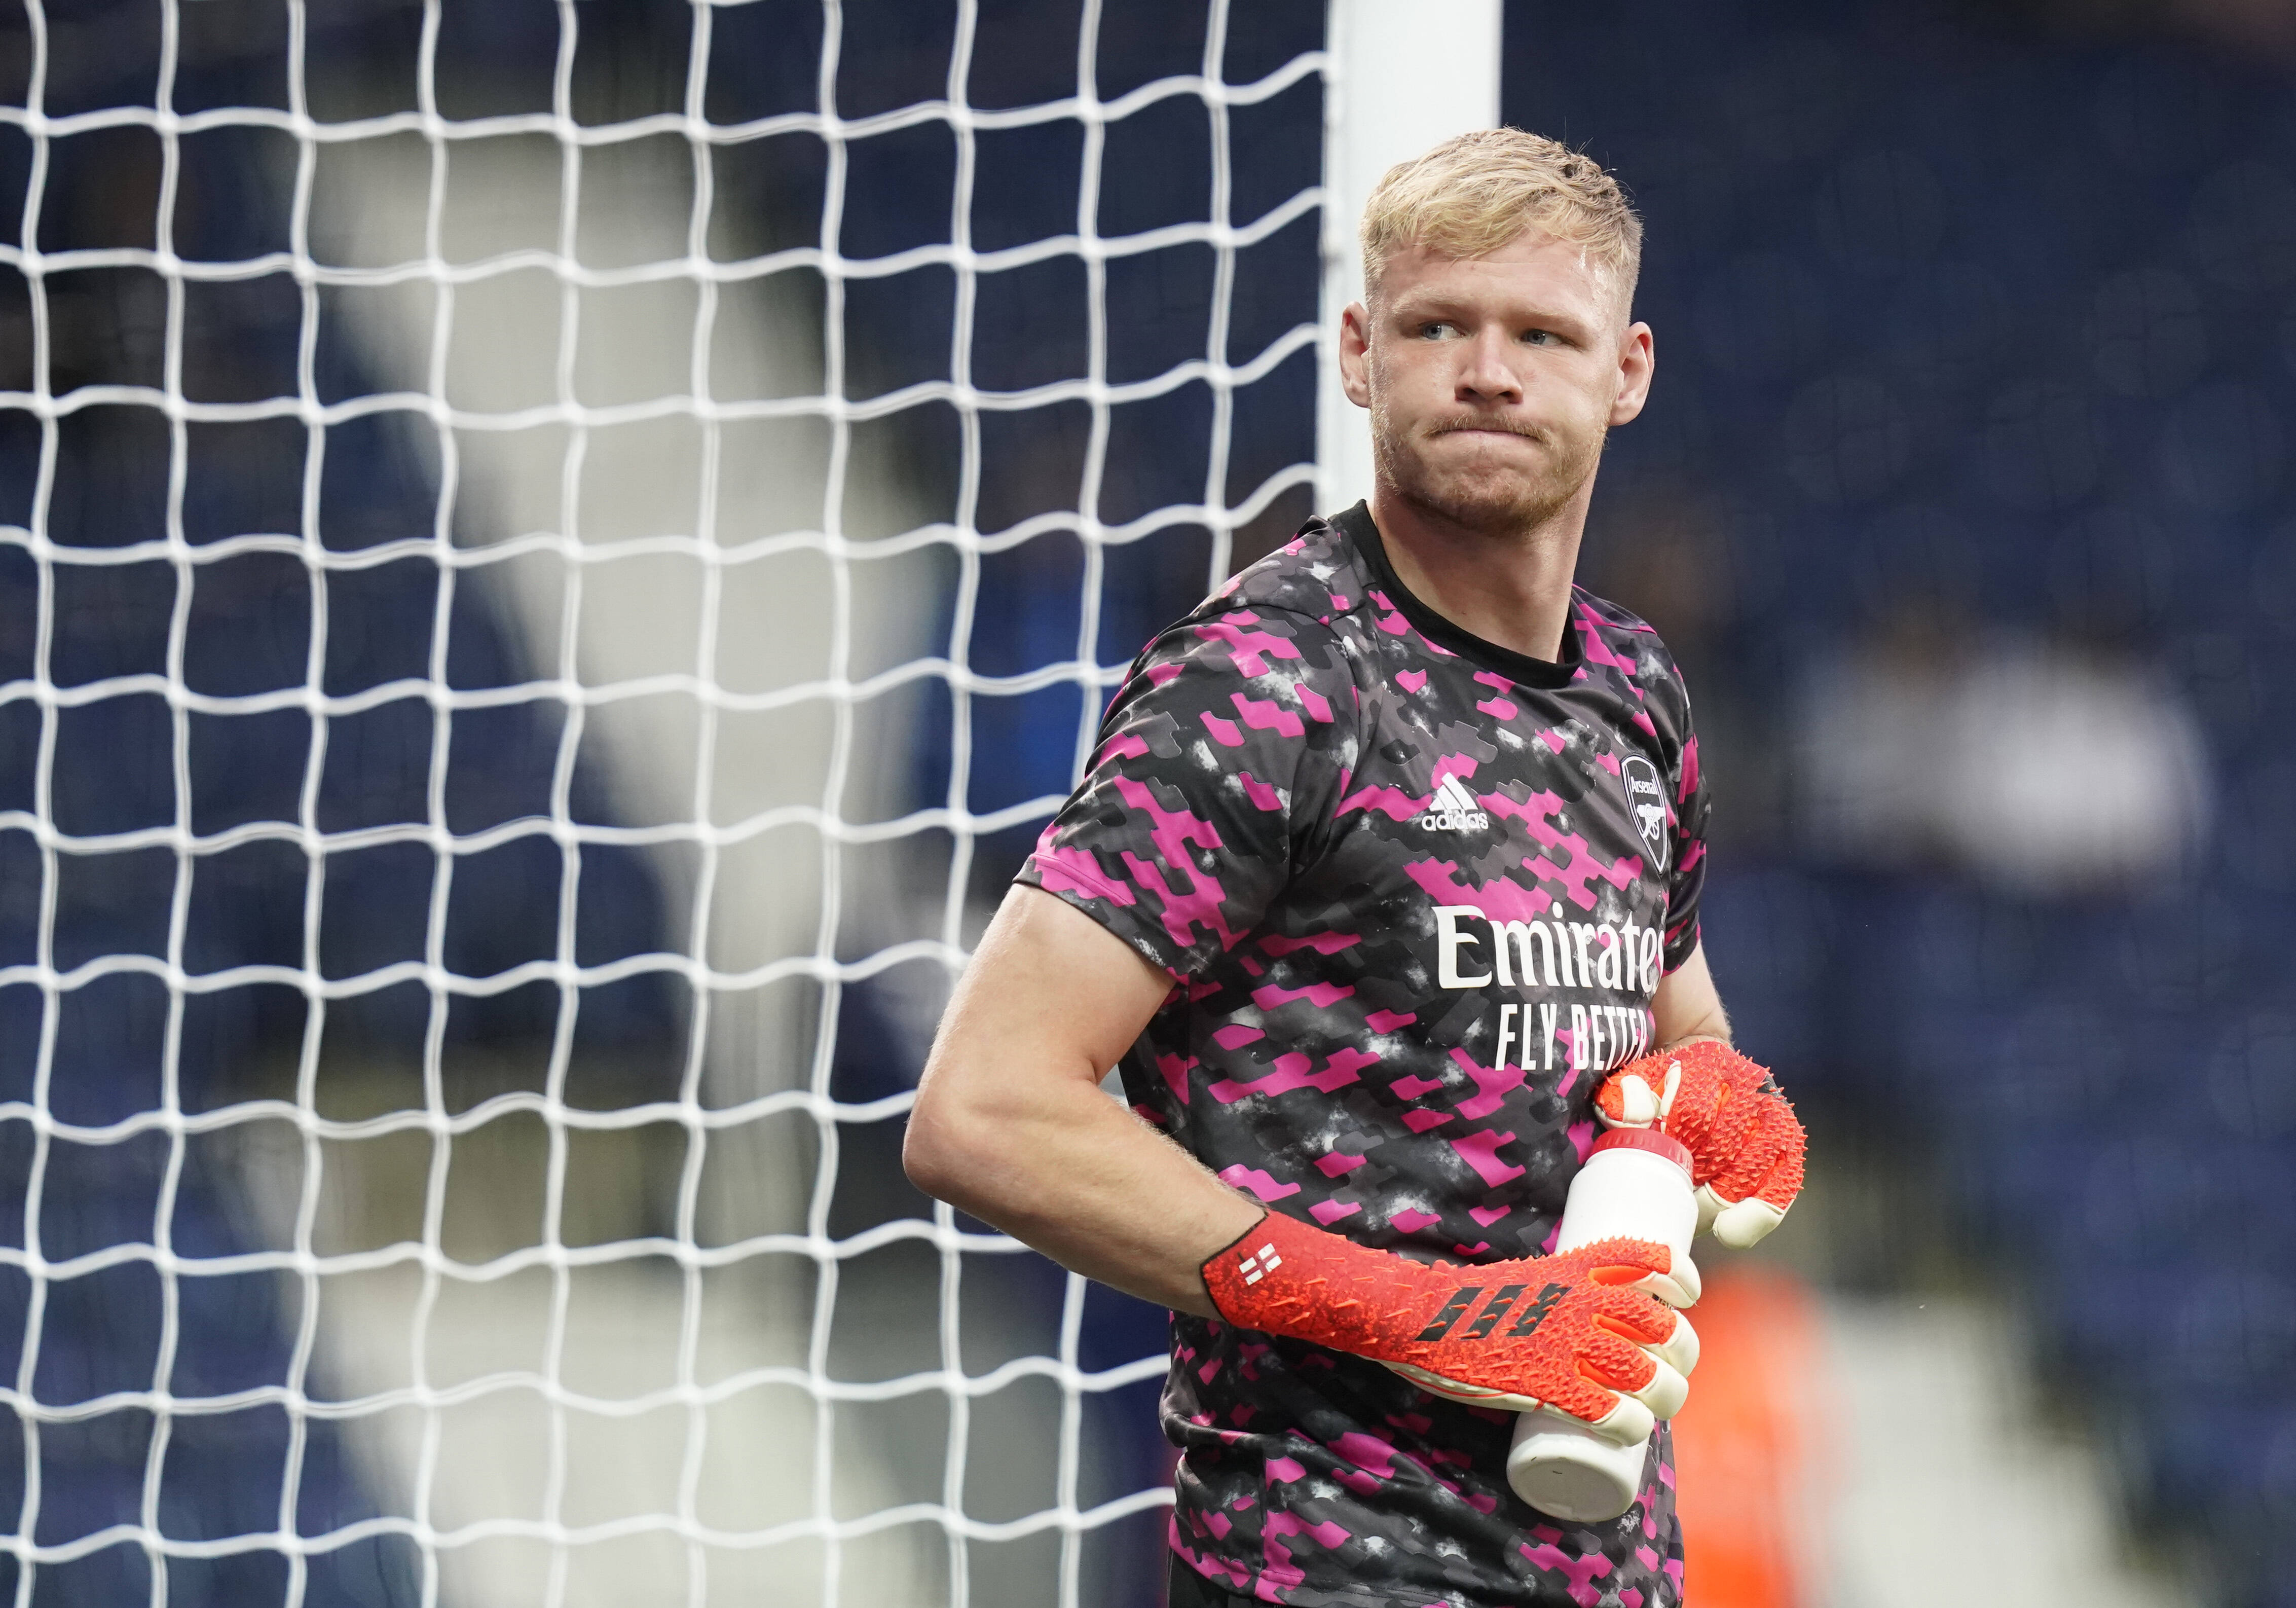 Arsenal goalkeeper opens up on why he turns off social media